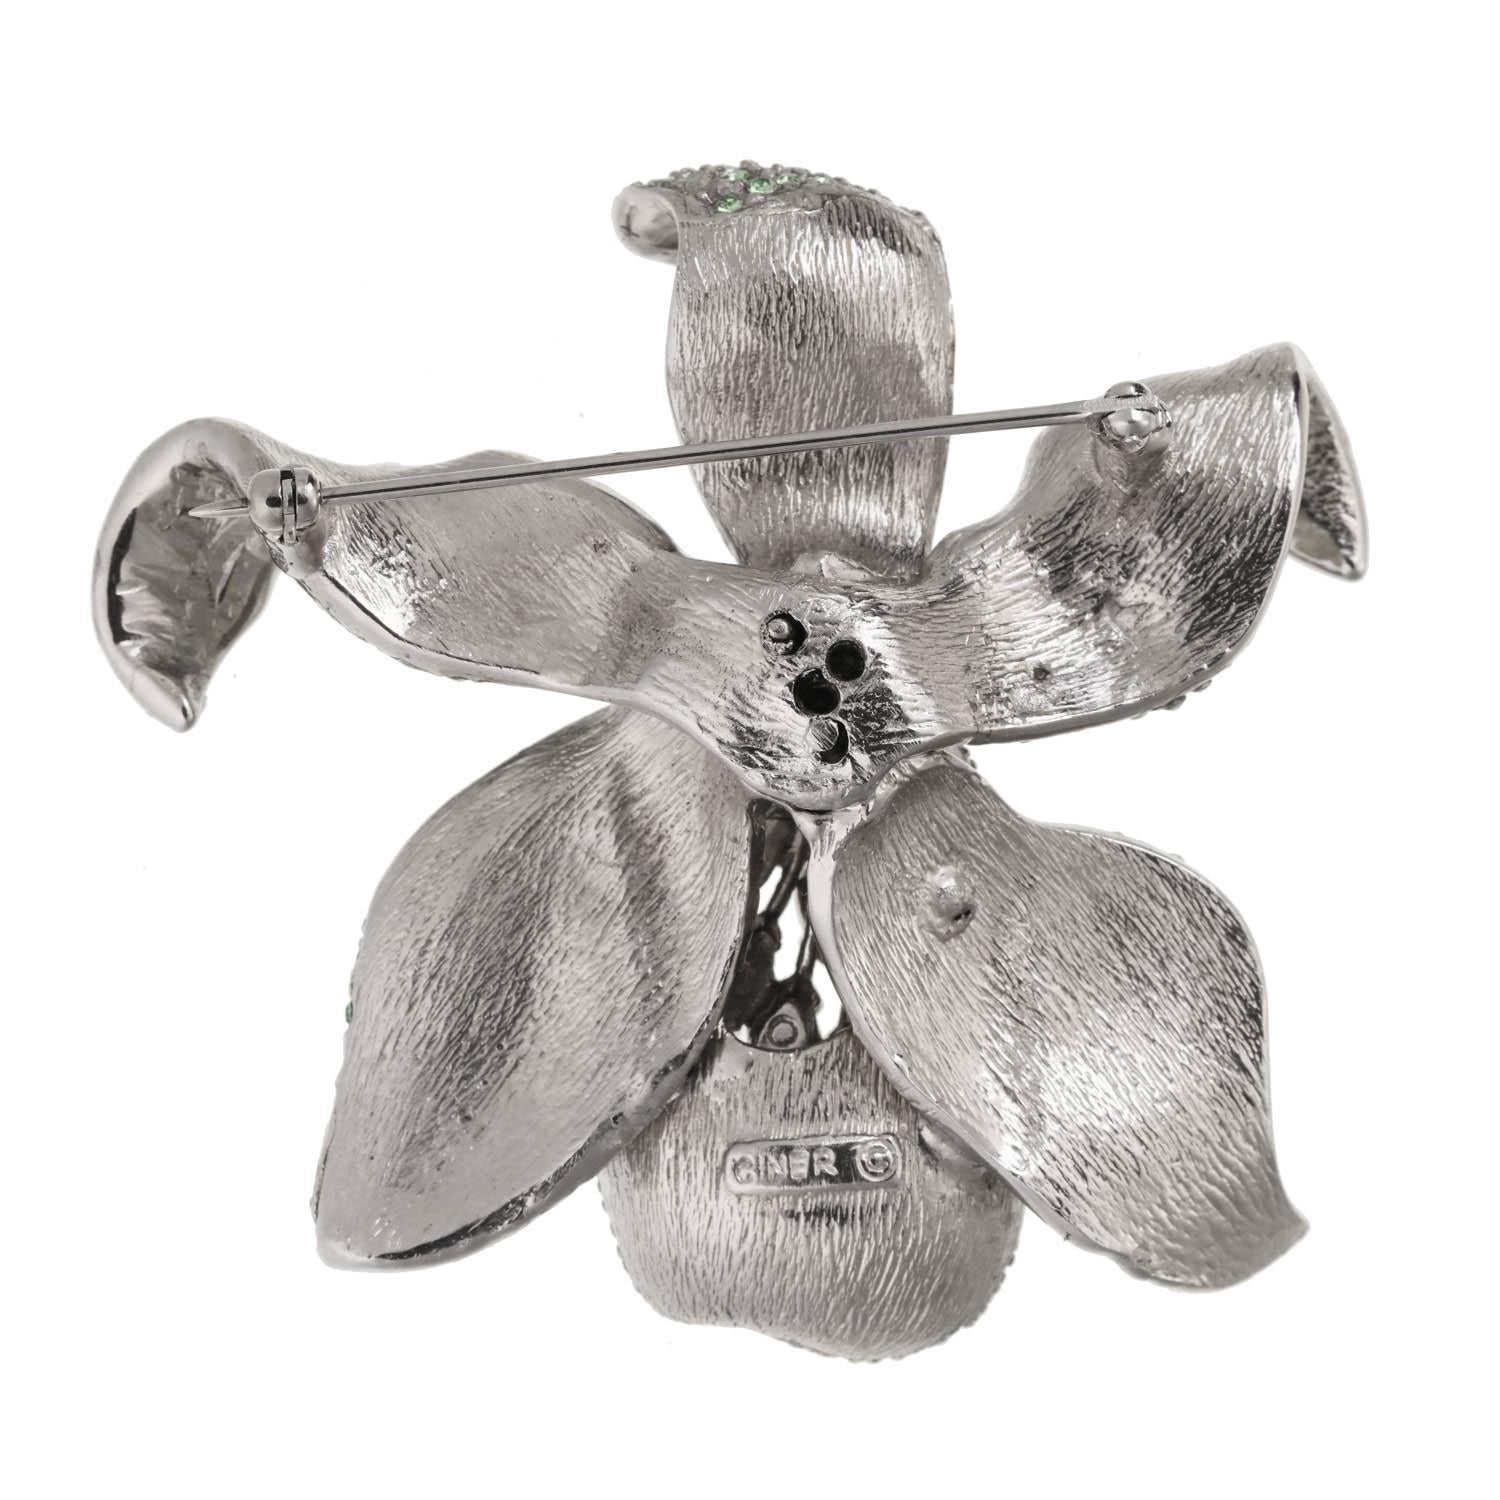 A classic CINER piece, this blooming orchid is the perfect accessory for any and every season! 

Materials:
Pewter
Rhodium Plating
Indian Sapphire Rhinestones
Light Azore Rhinestones
Erinite Rhinestones
Jonquil Rhinestones
Brass Pin and Catch